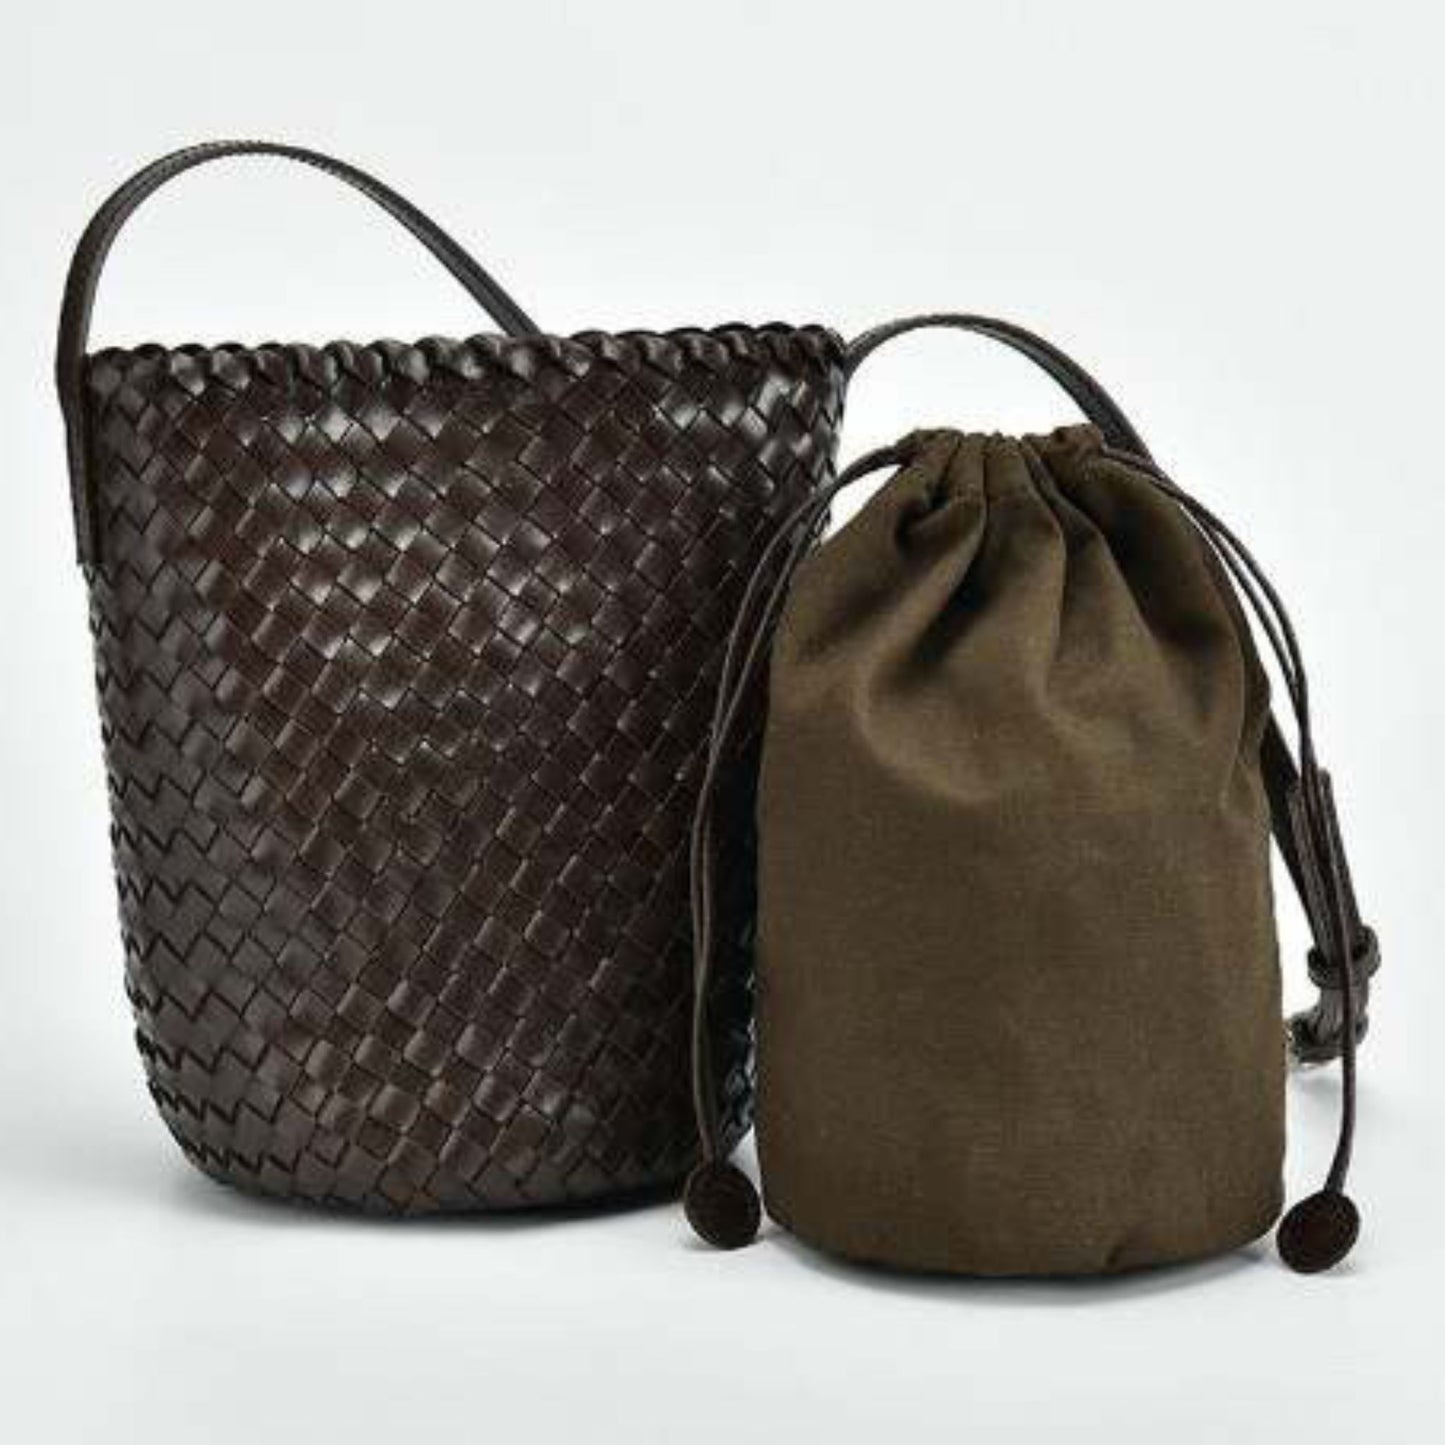 The Woven Leather Bucket Bag